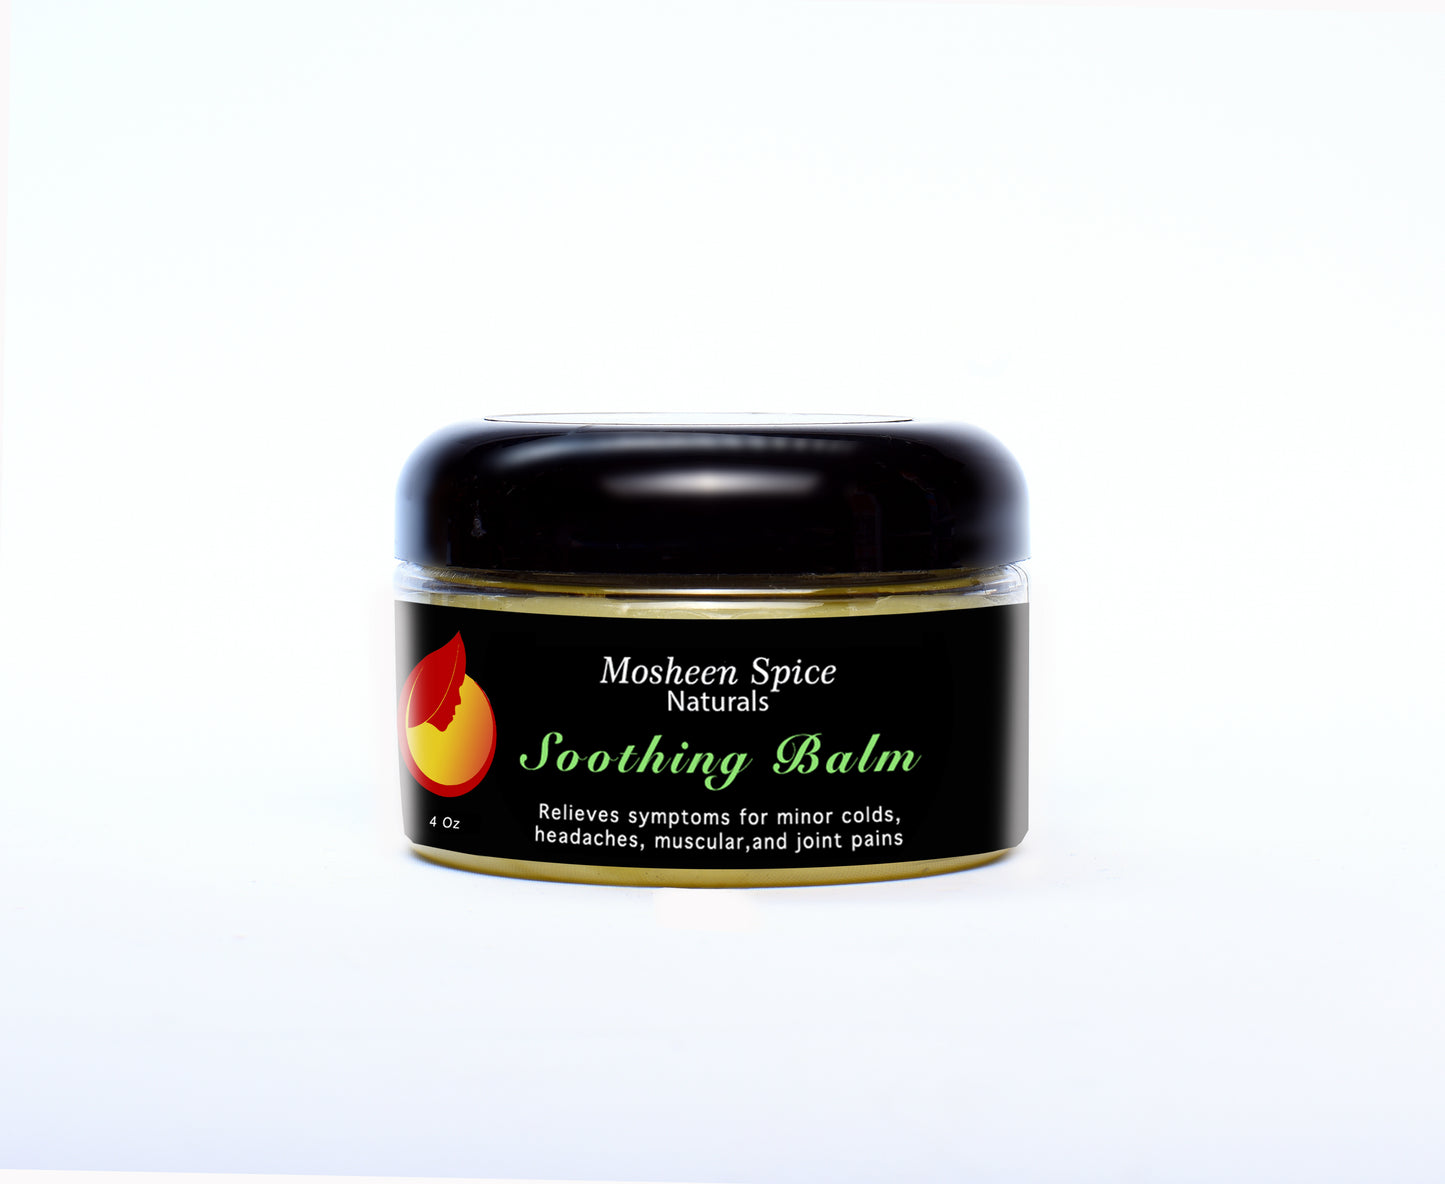 Soothing Balm